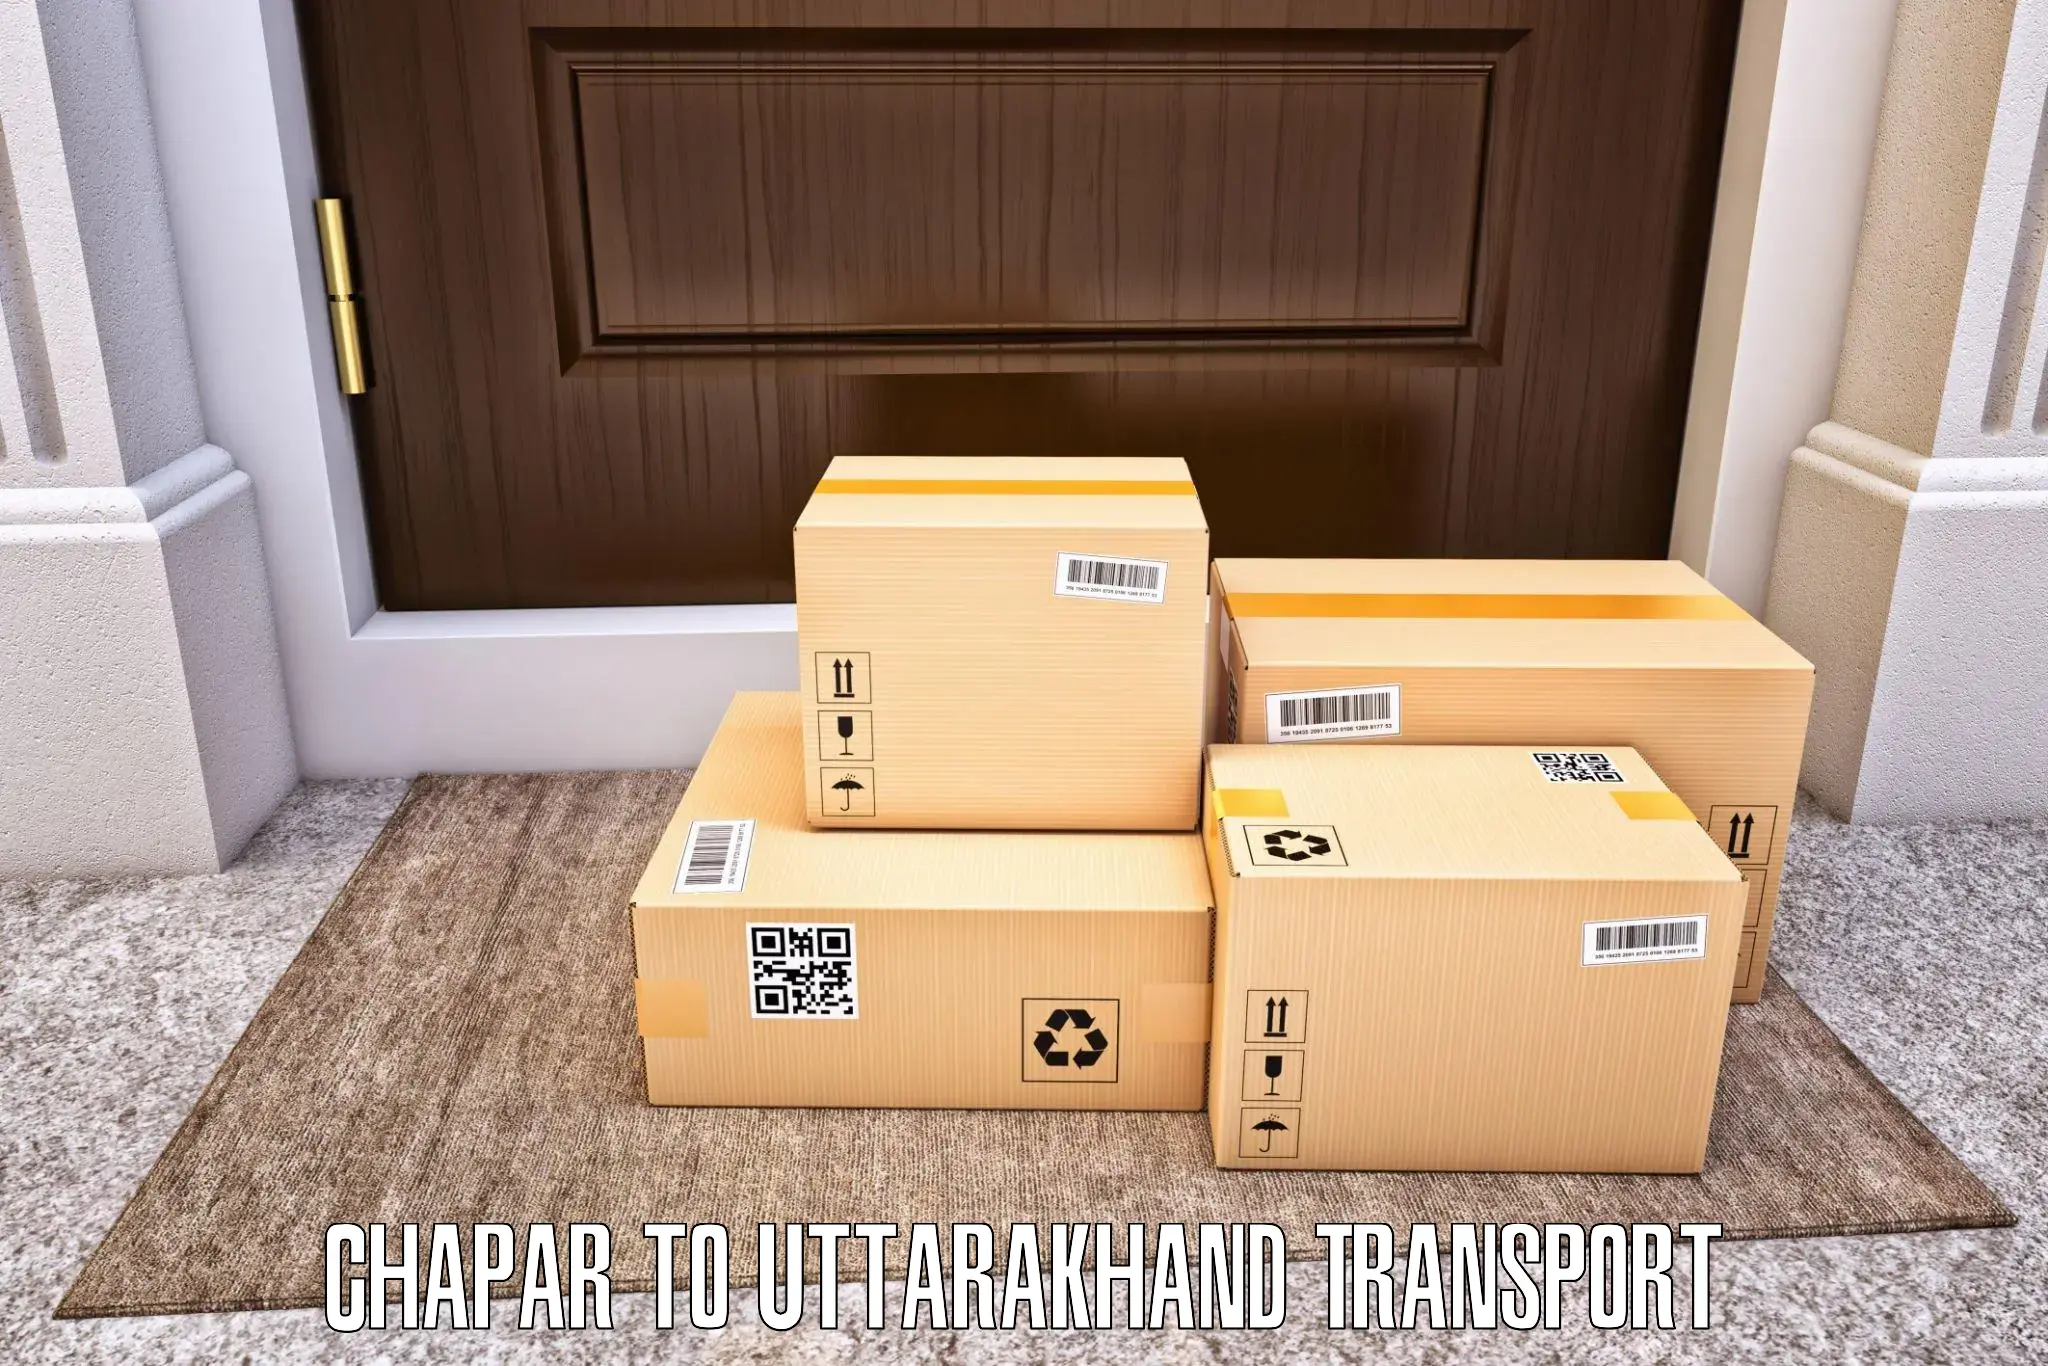 Scooty transport charges Chapar to Paithani